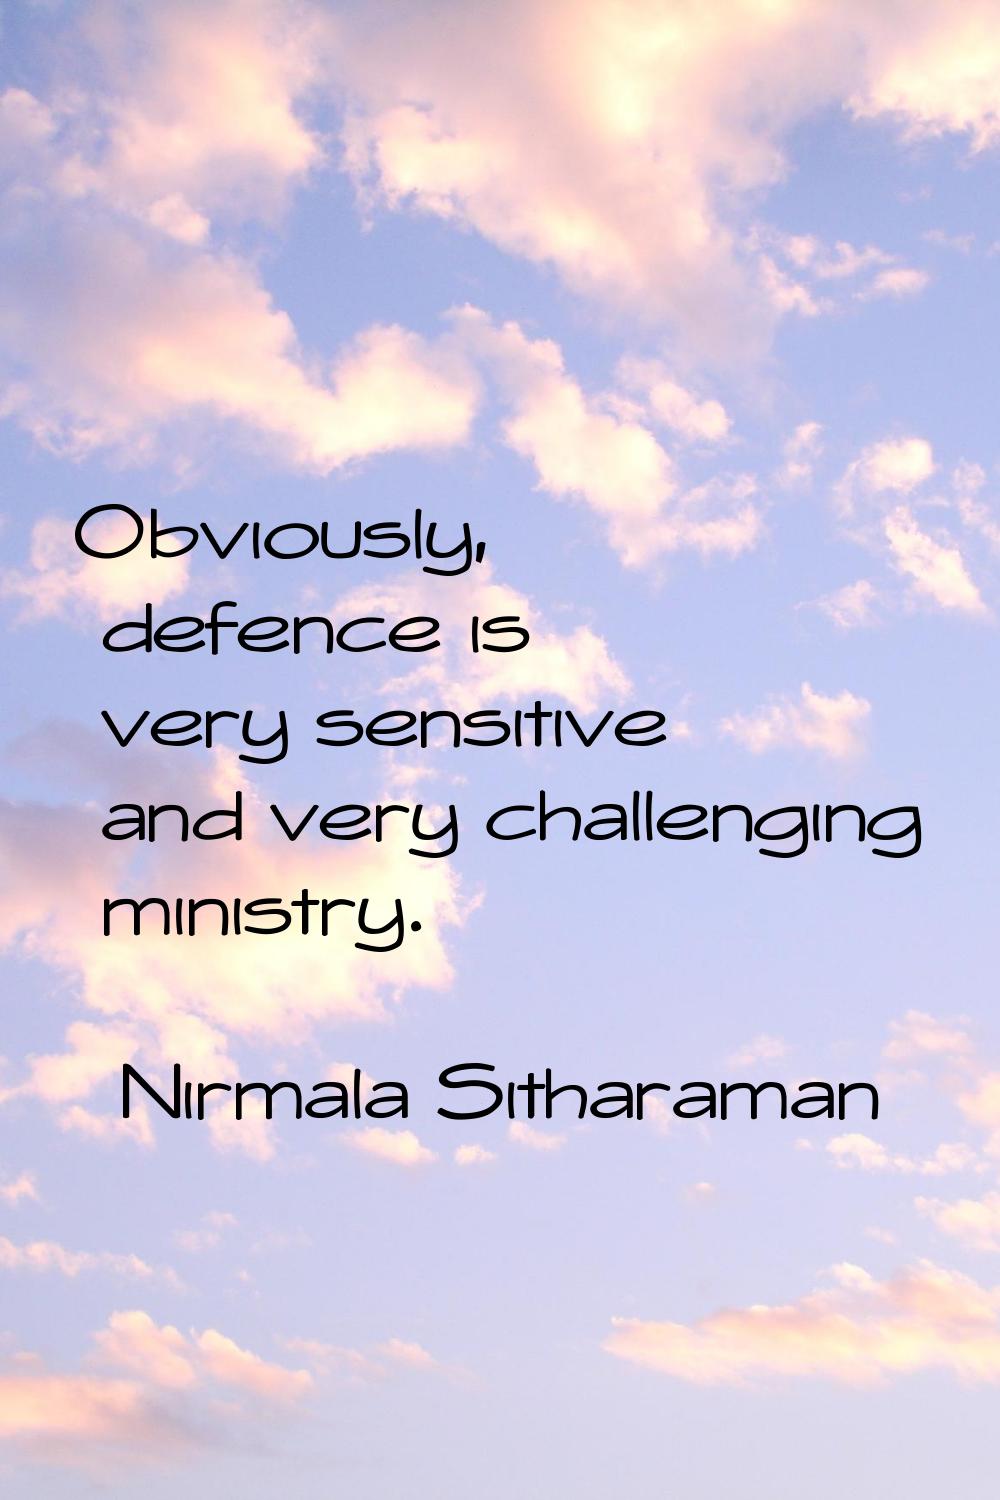 Obviously, defence is very sensitive and very challenging ministry.